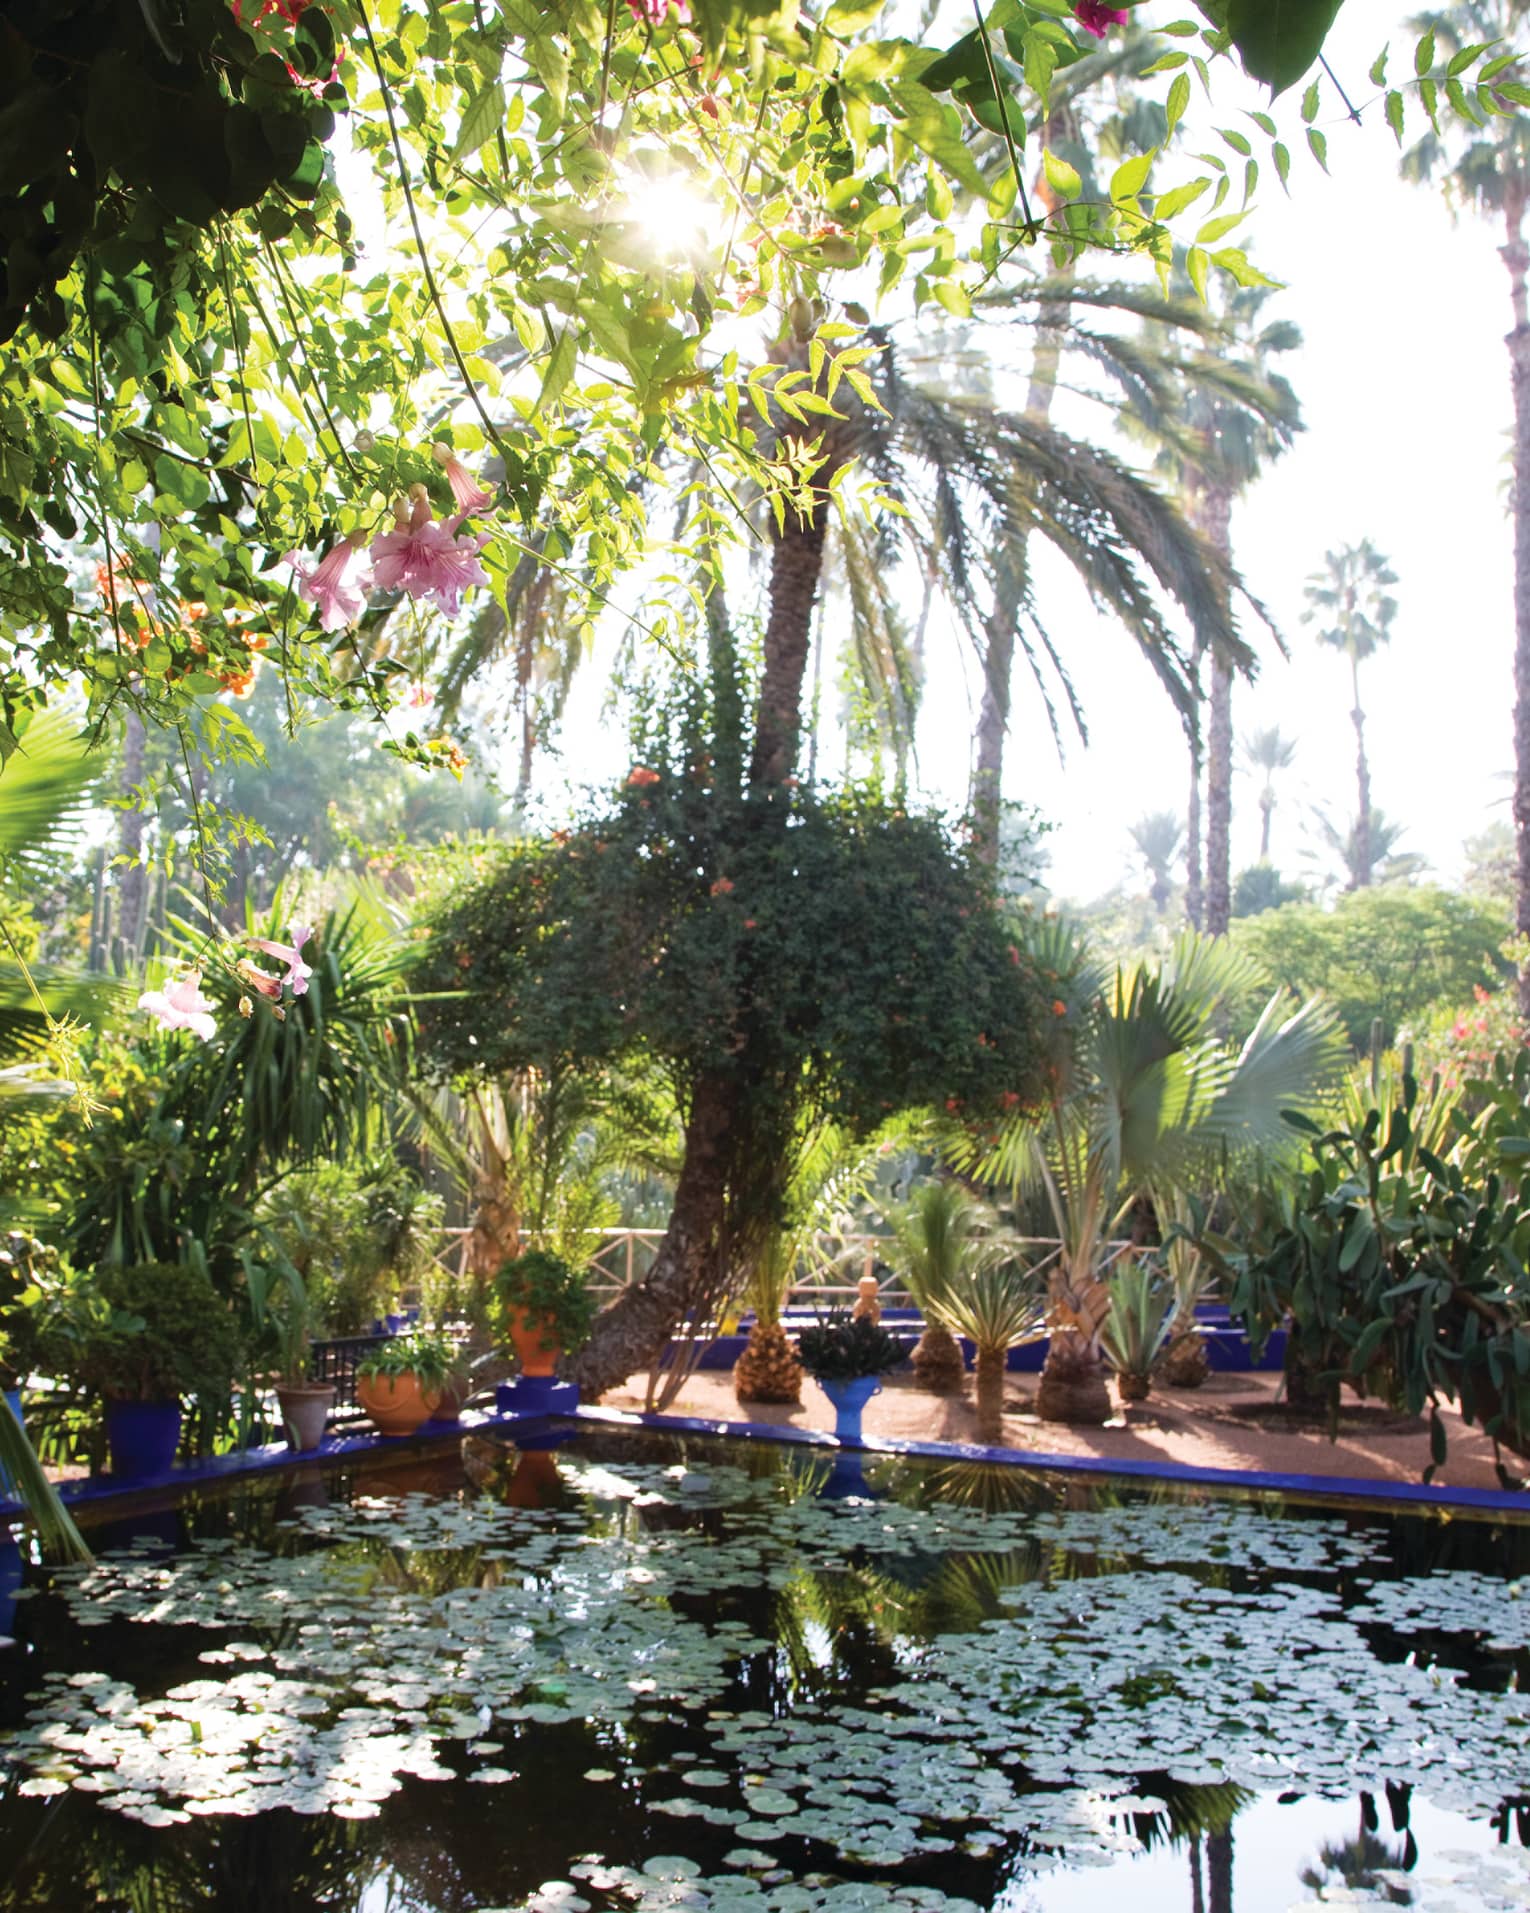 Palm trees, tropical plants around patio, outdoor pond with lily pads